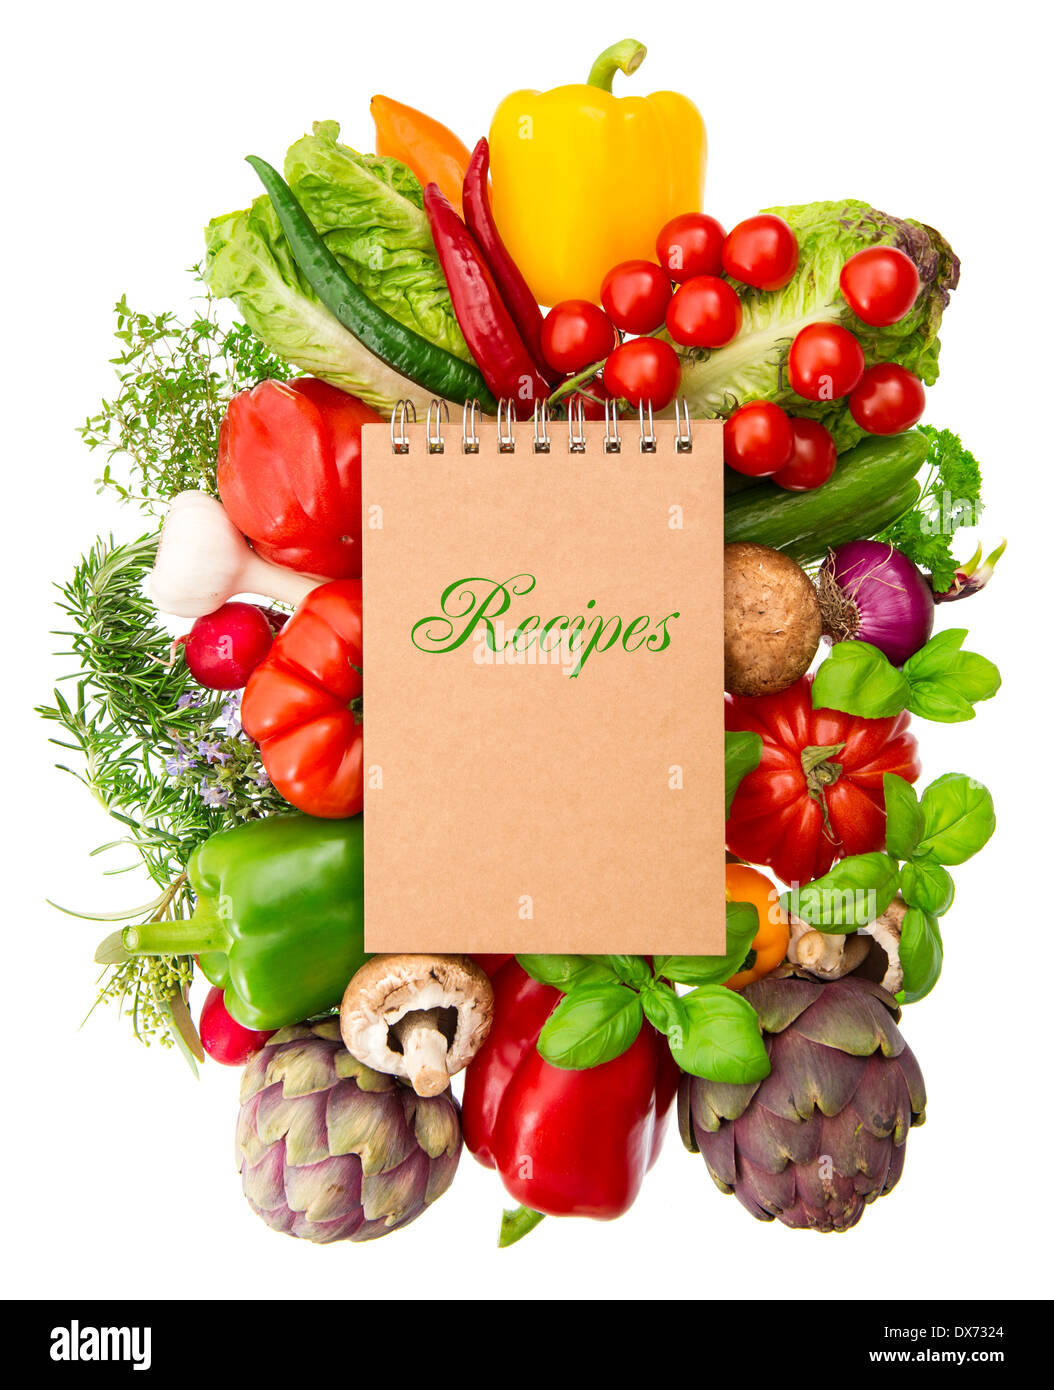 recipe book with fresh organic vegetables and herbs isolated on white background. raw food. healthy nutrition ingredients Stock Photo